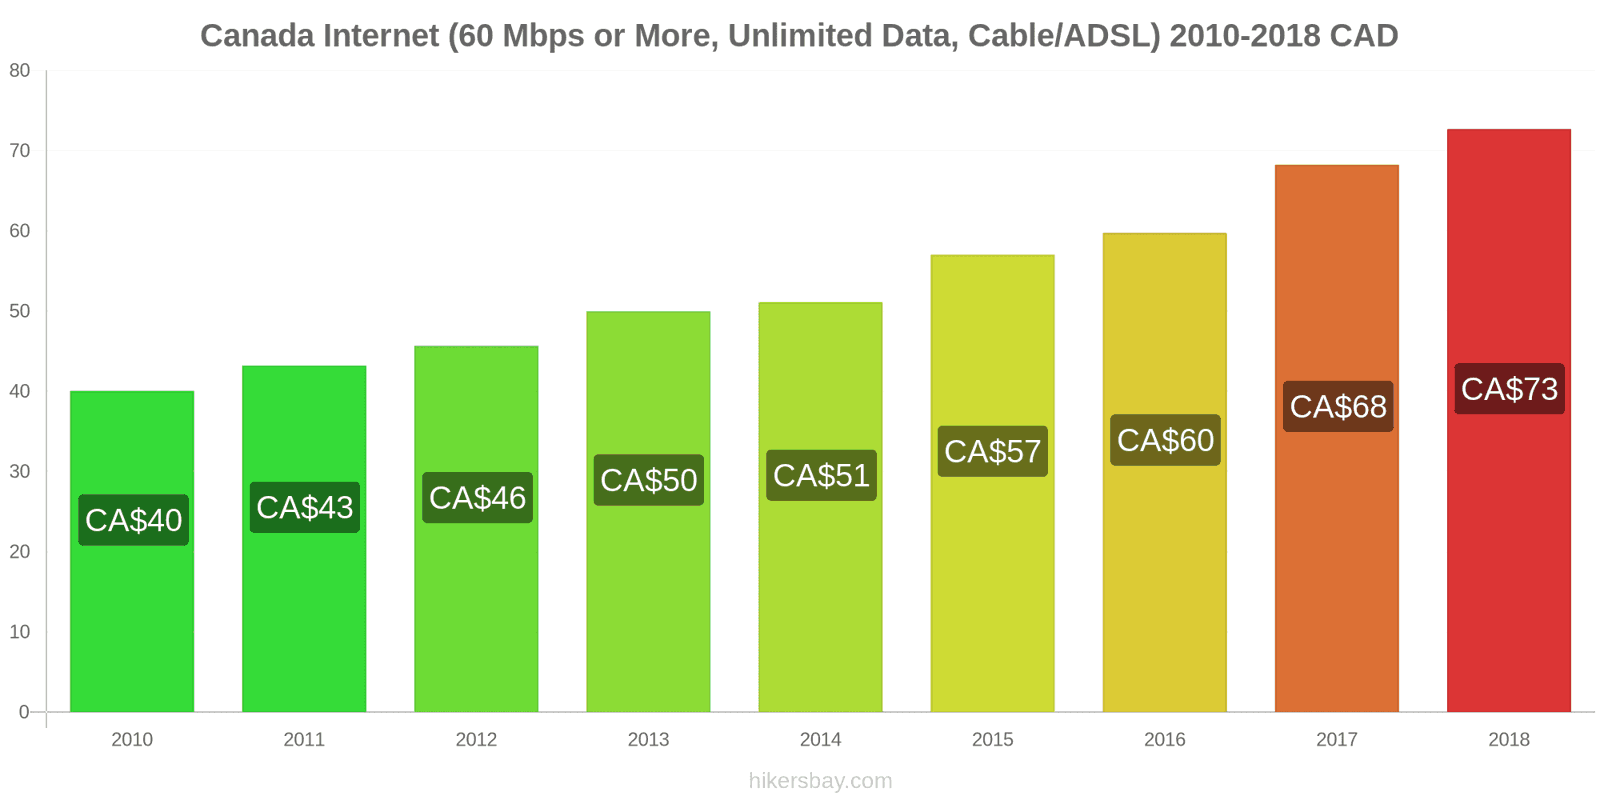 Canada price changes Internet (60 Mbps or more, unlimited data, cable/ADSL) hikersbay.com